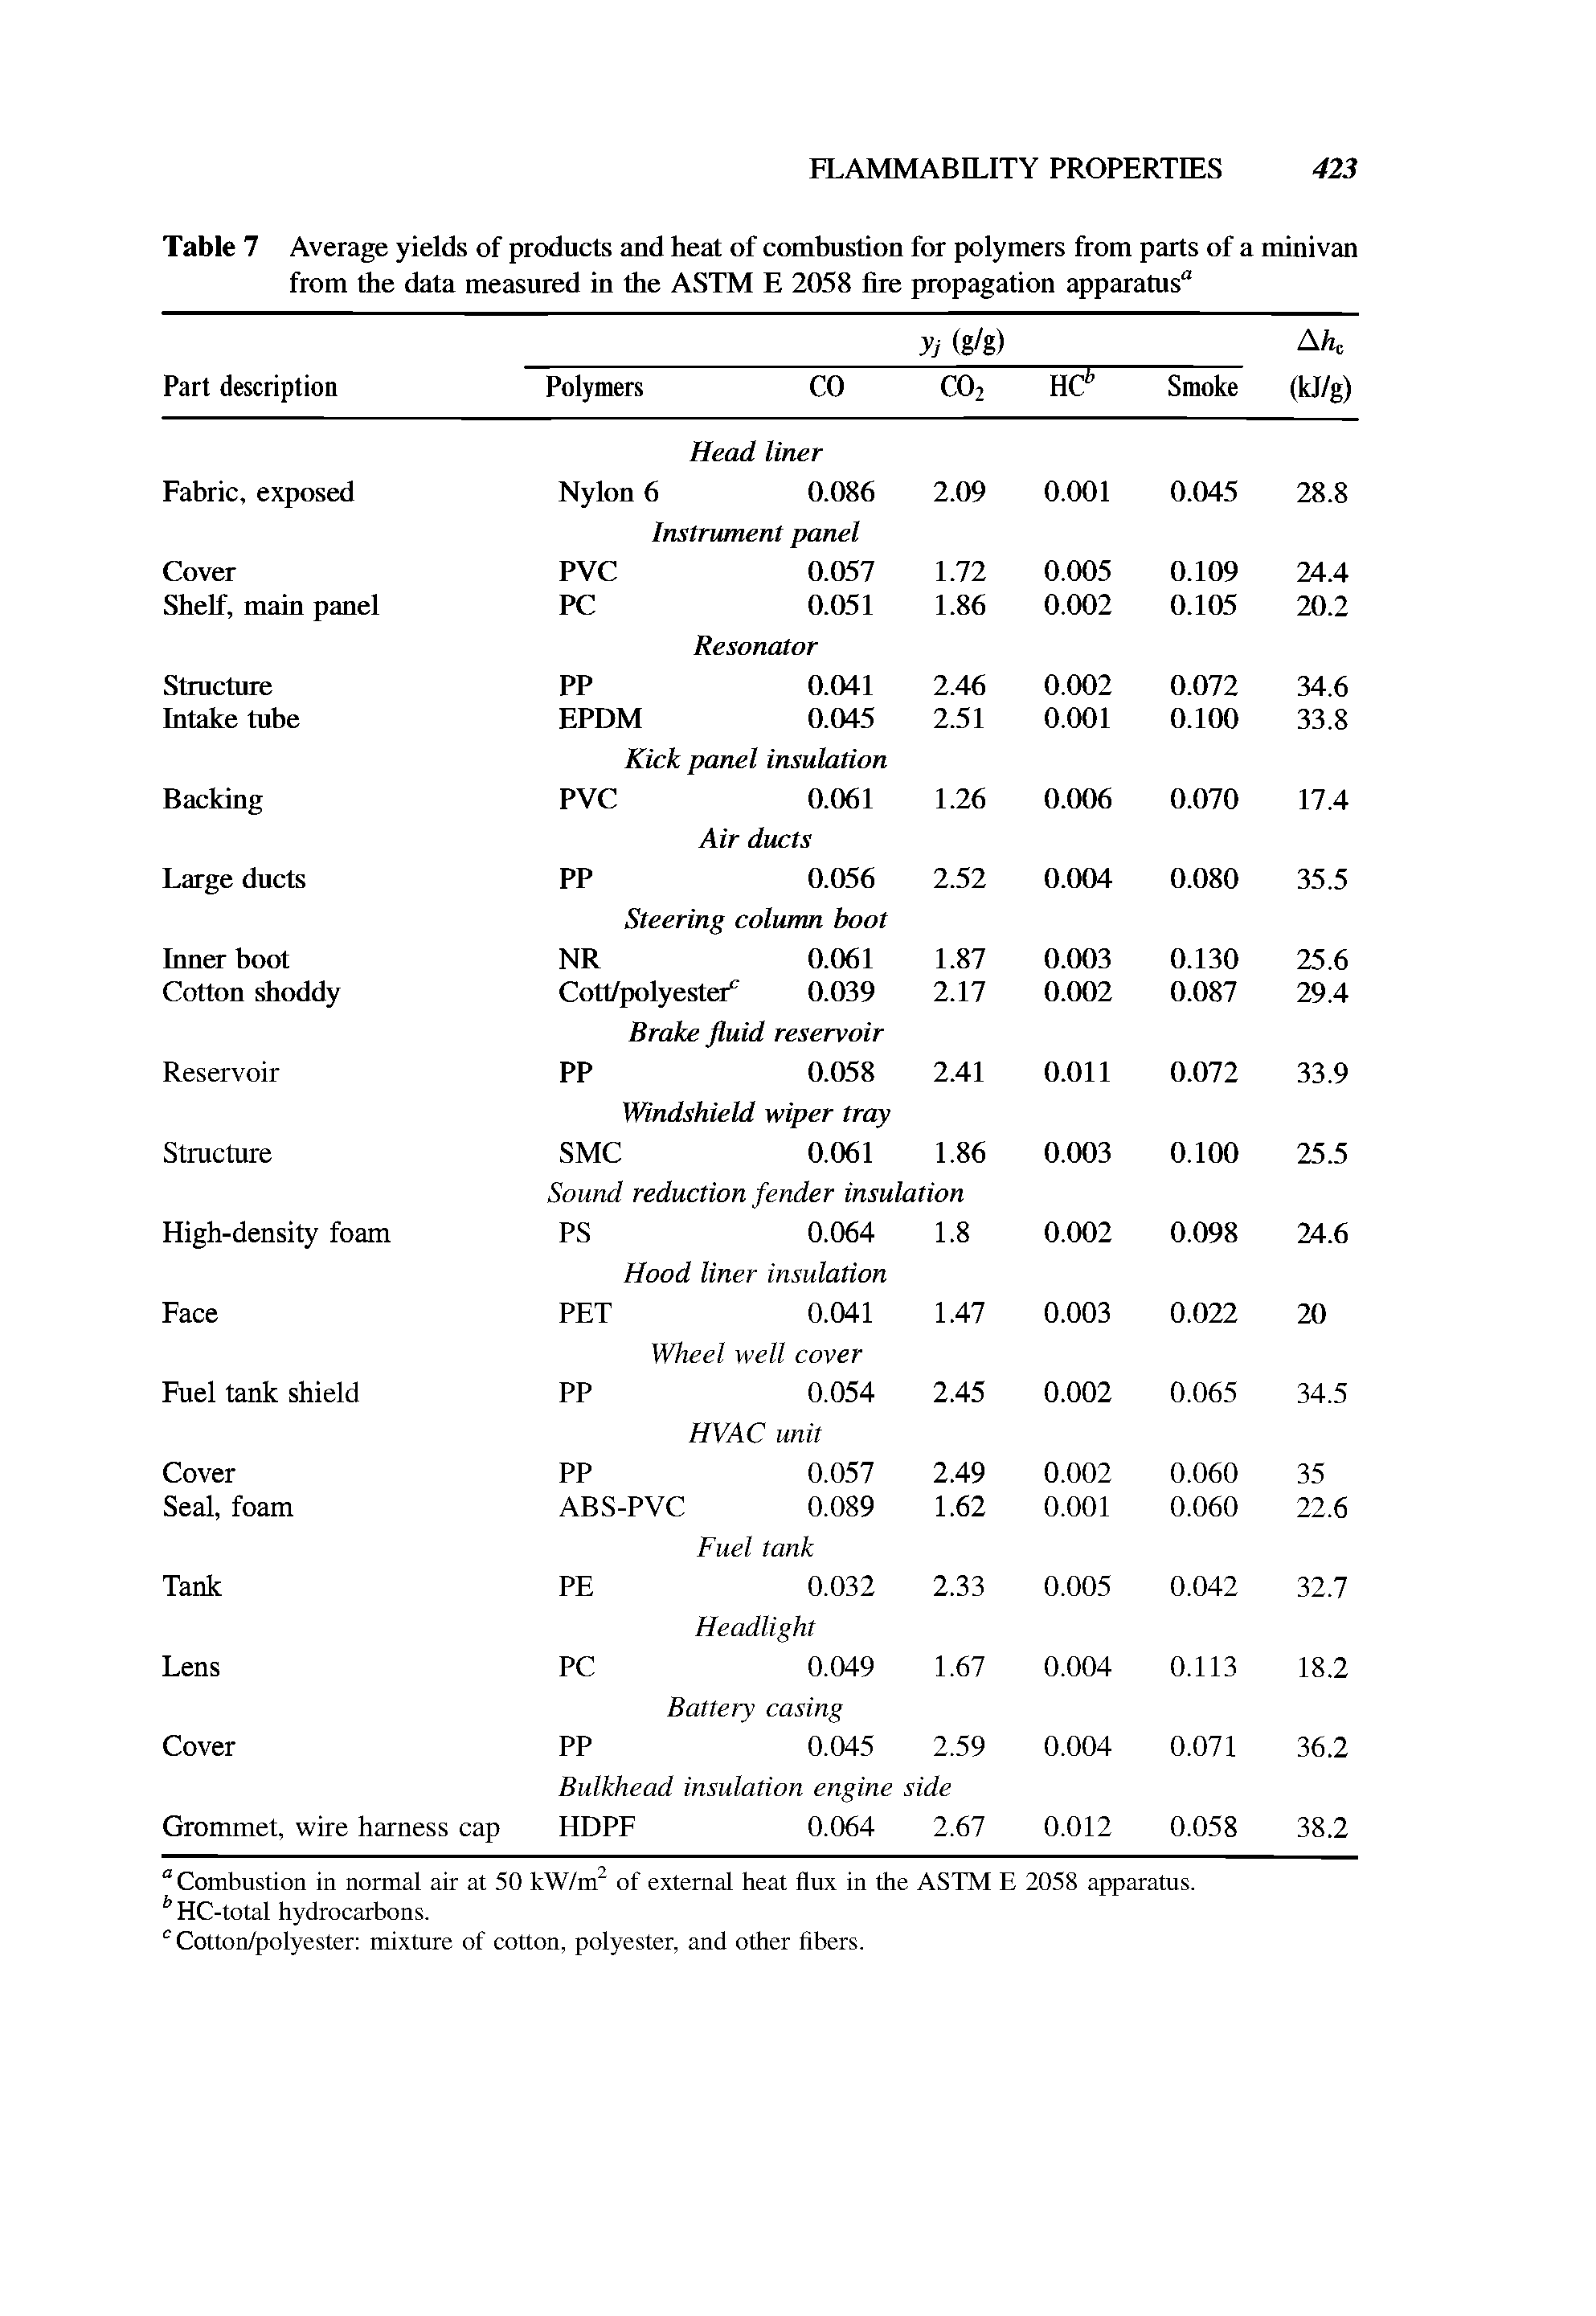 Table 7 Average yields of products and heat of combustion for polymers from parts of a minivan from the data measured in the ASTM E 2058 fire propagation apparatus0...